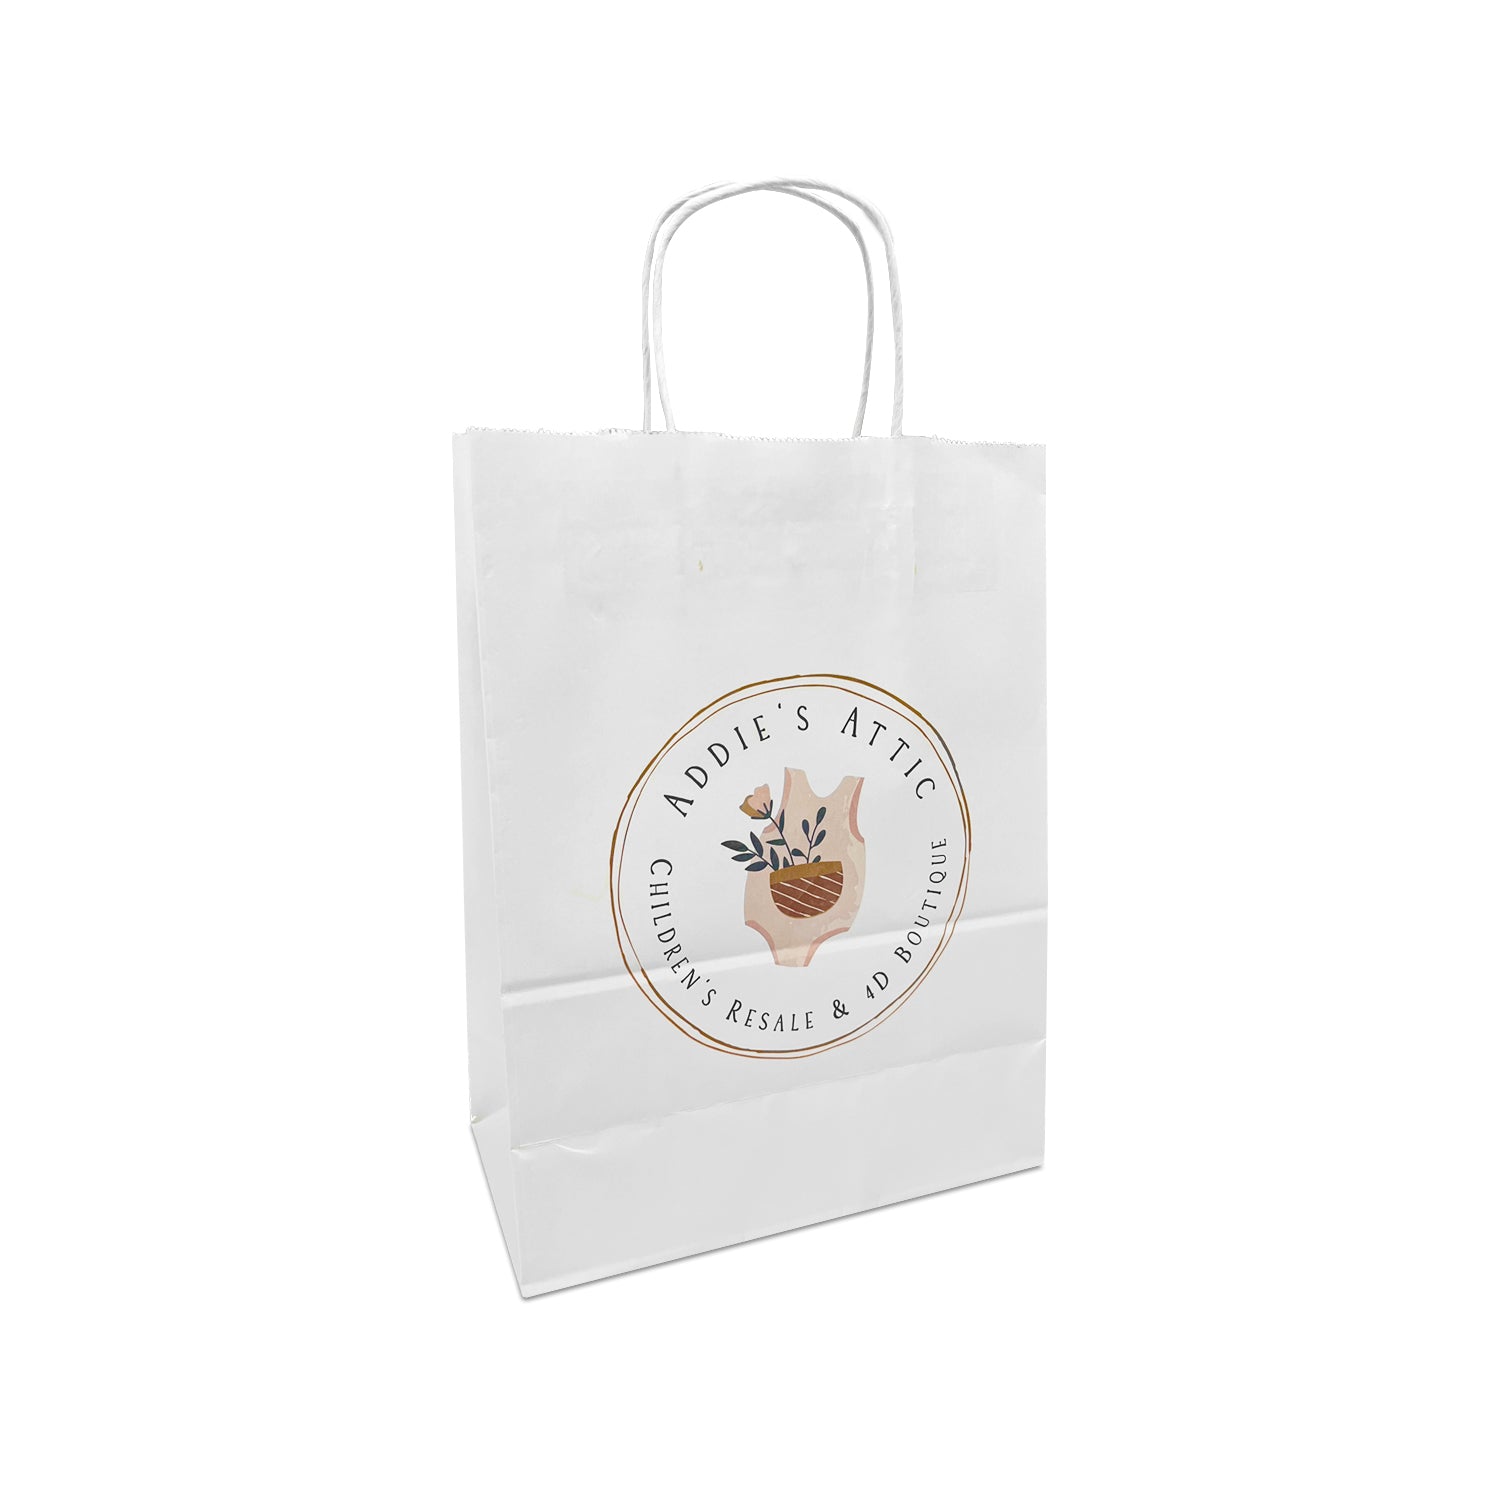 250 Pcs, Gem, 5.3x3.5x8.5 inches, White Paper Bags, with Twisted Handle, Full Color Custom Print